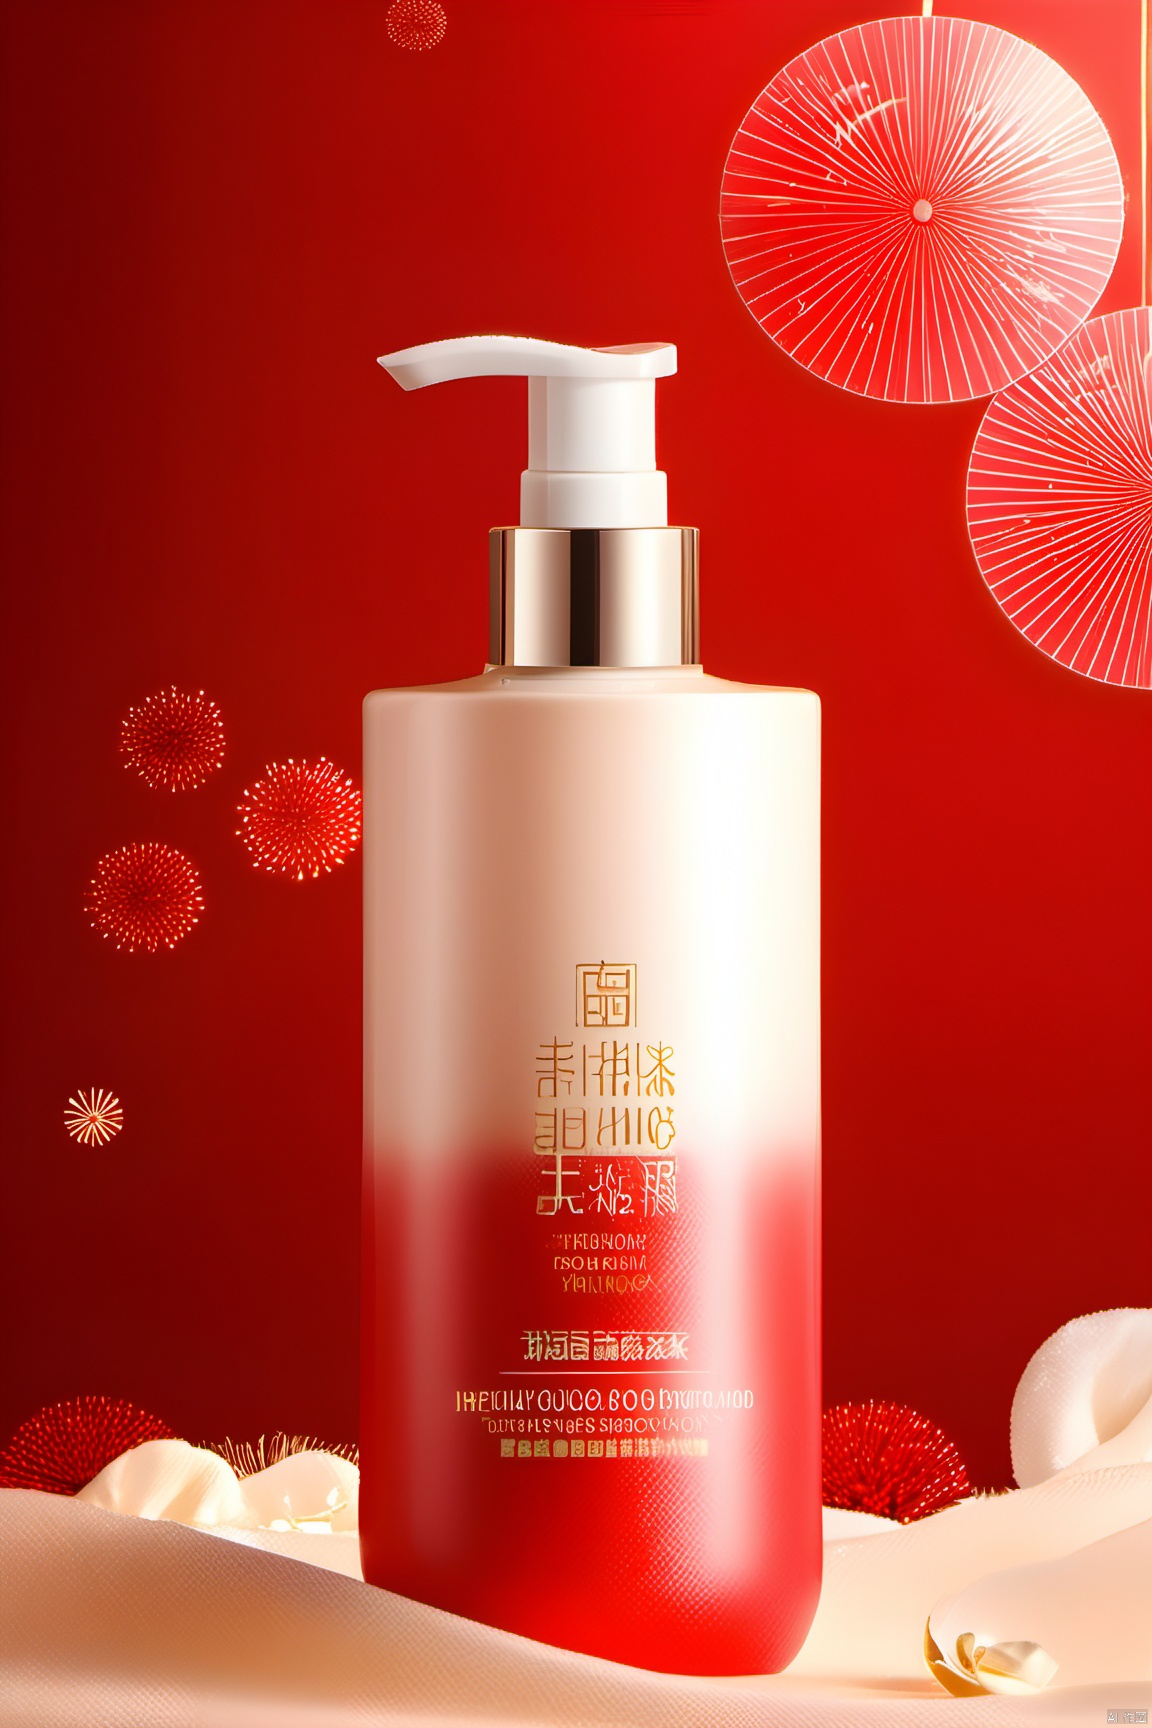  1, New Year Festive (style) 3 product photography, festive atmosphere scenes, sparkling, Chinese red, scented body lotion products, glamorous atmosphere, eye catching, high end, advanced color palette, C4D, redshift rendering, high quality, masterpieces, Ultra High Definition, super detailed, festive (style), Red festive wallpaper